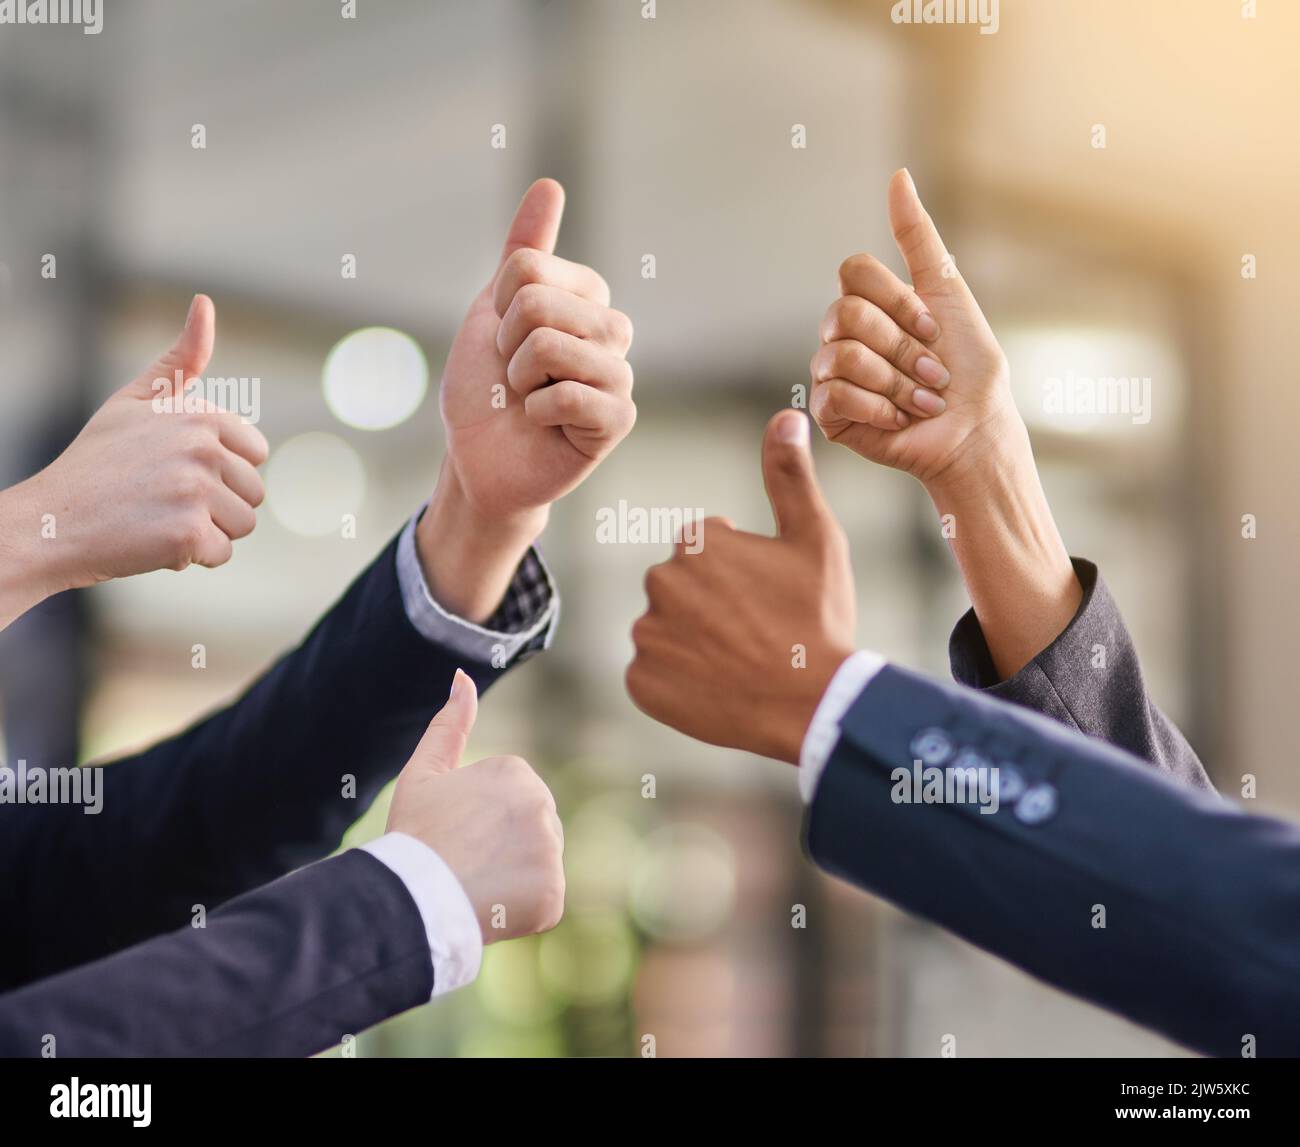 Fantastic job. a group of office workers giving thumbs up together. Stock Photo